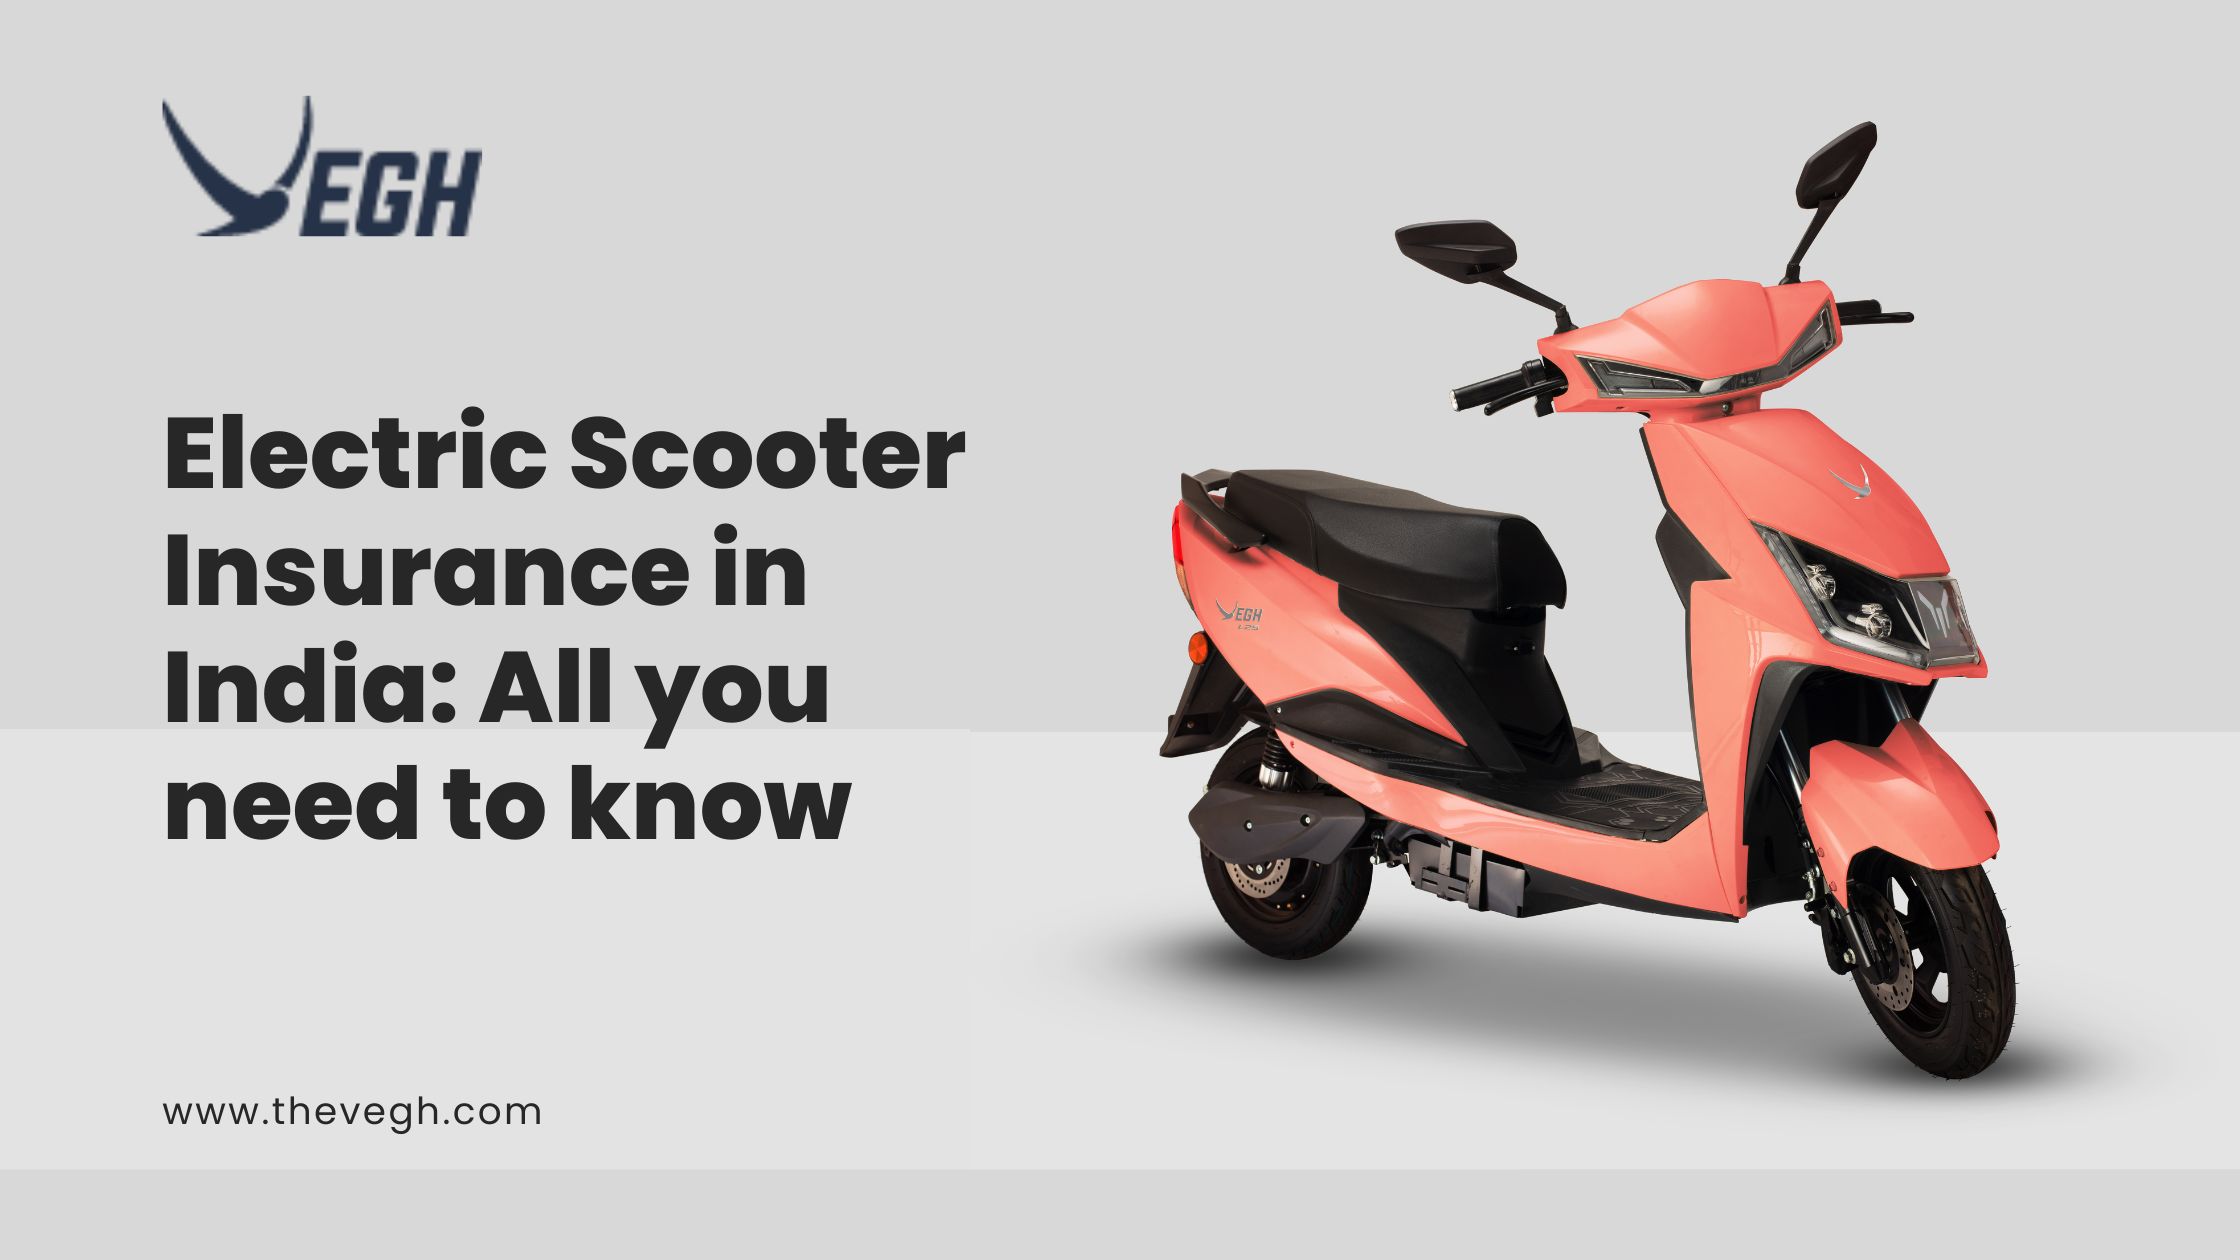 Electric Scooter Insurance in India: All you need to know